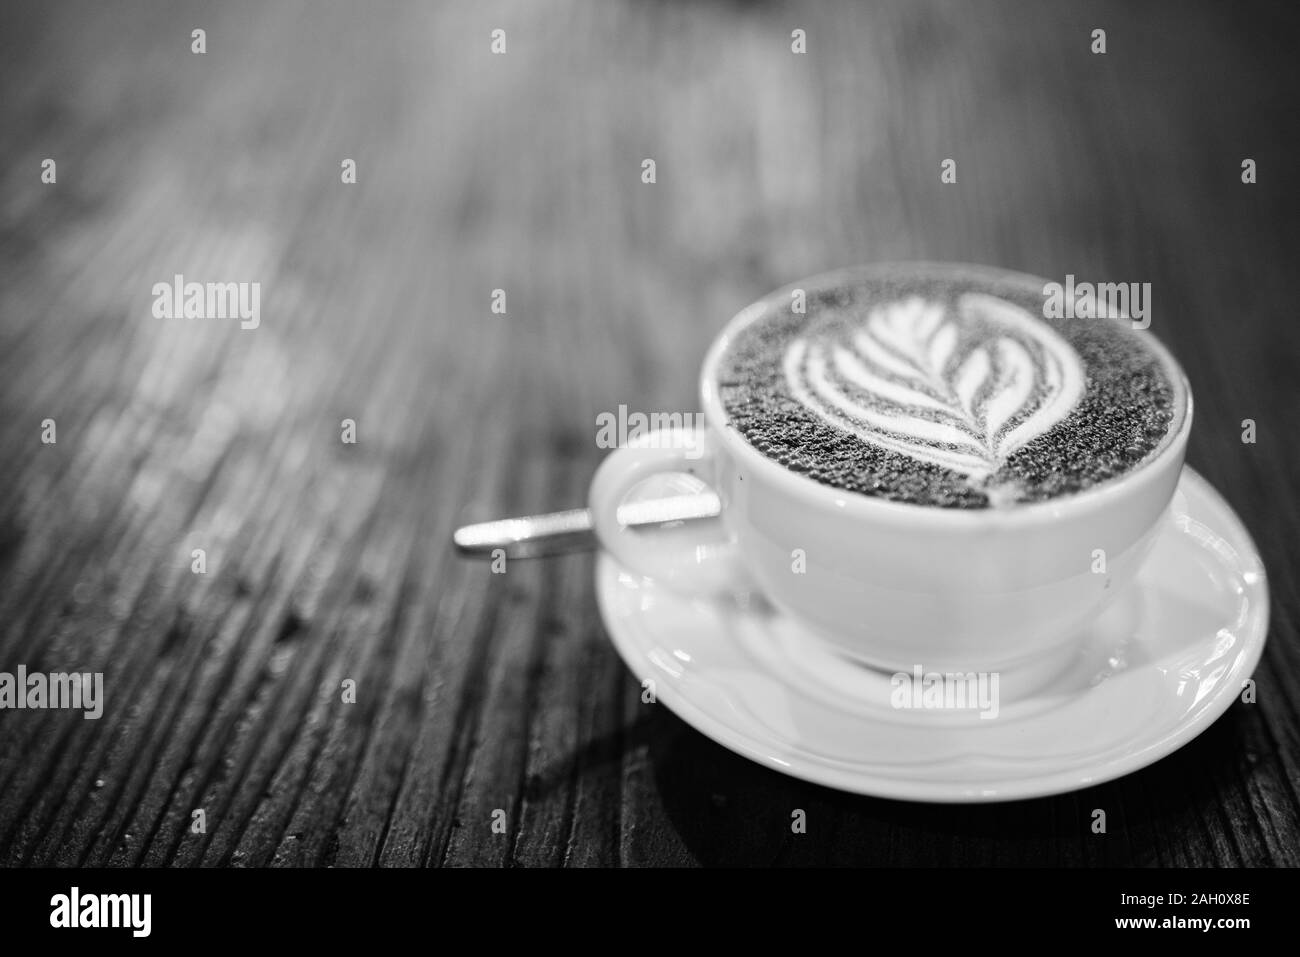 Caffeine Design Concept - Old Kettle For Coffee, Coffee Cups On A Wooden  Background. Stock Photo, Picture and Royalty Free Image. Image 94777075.